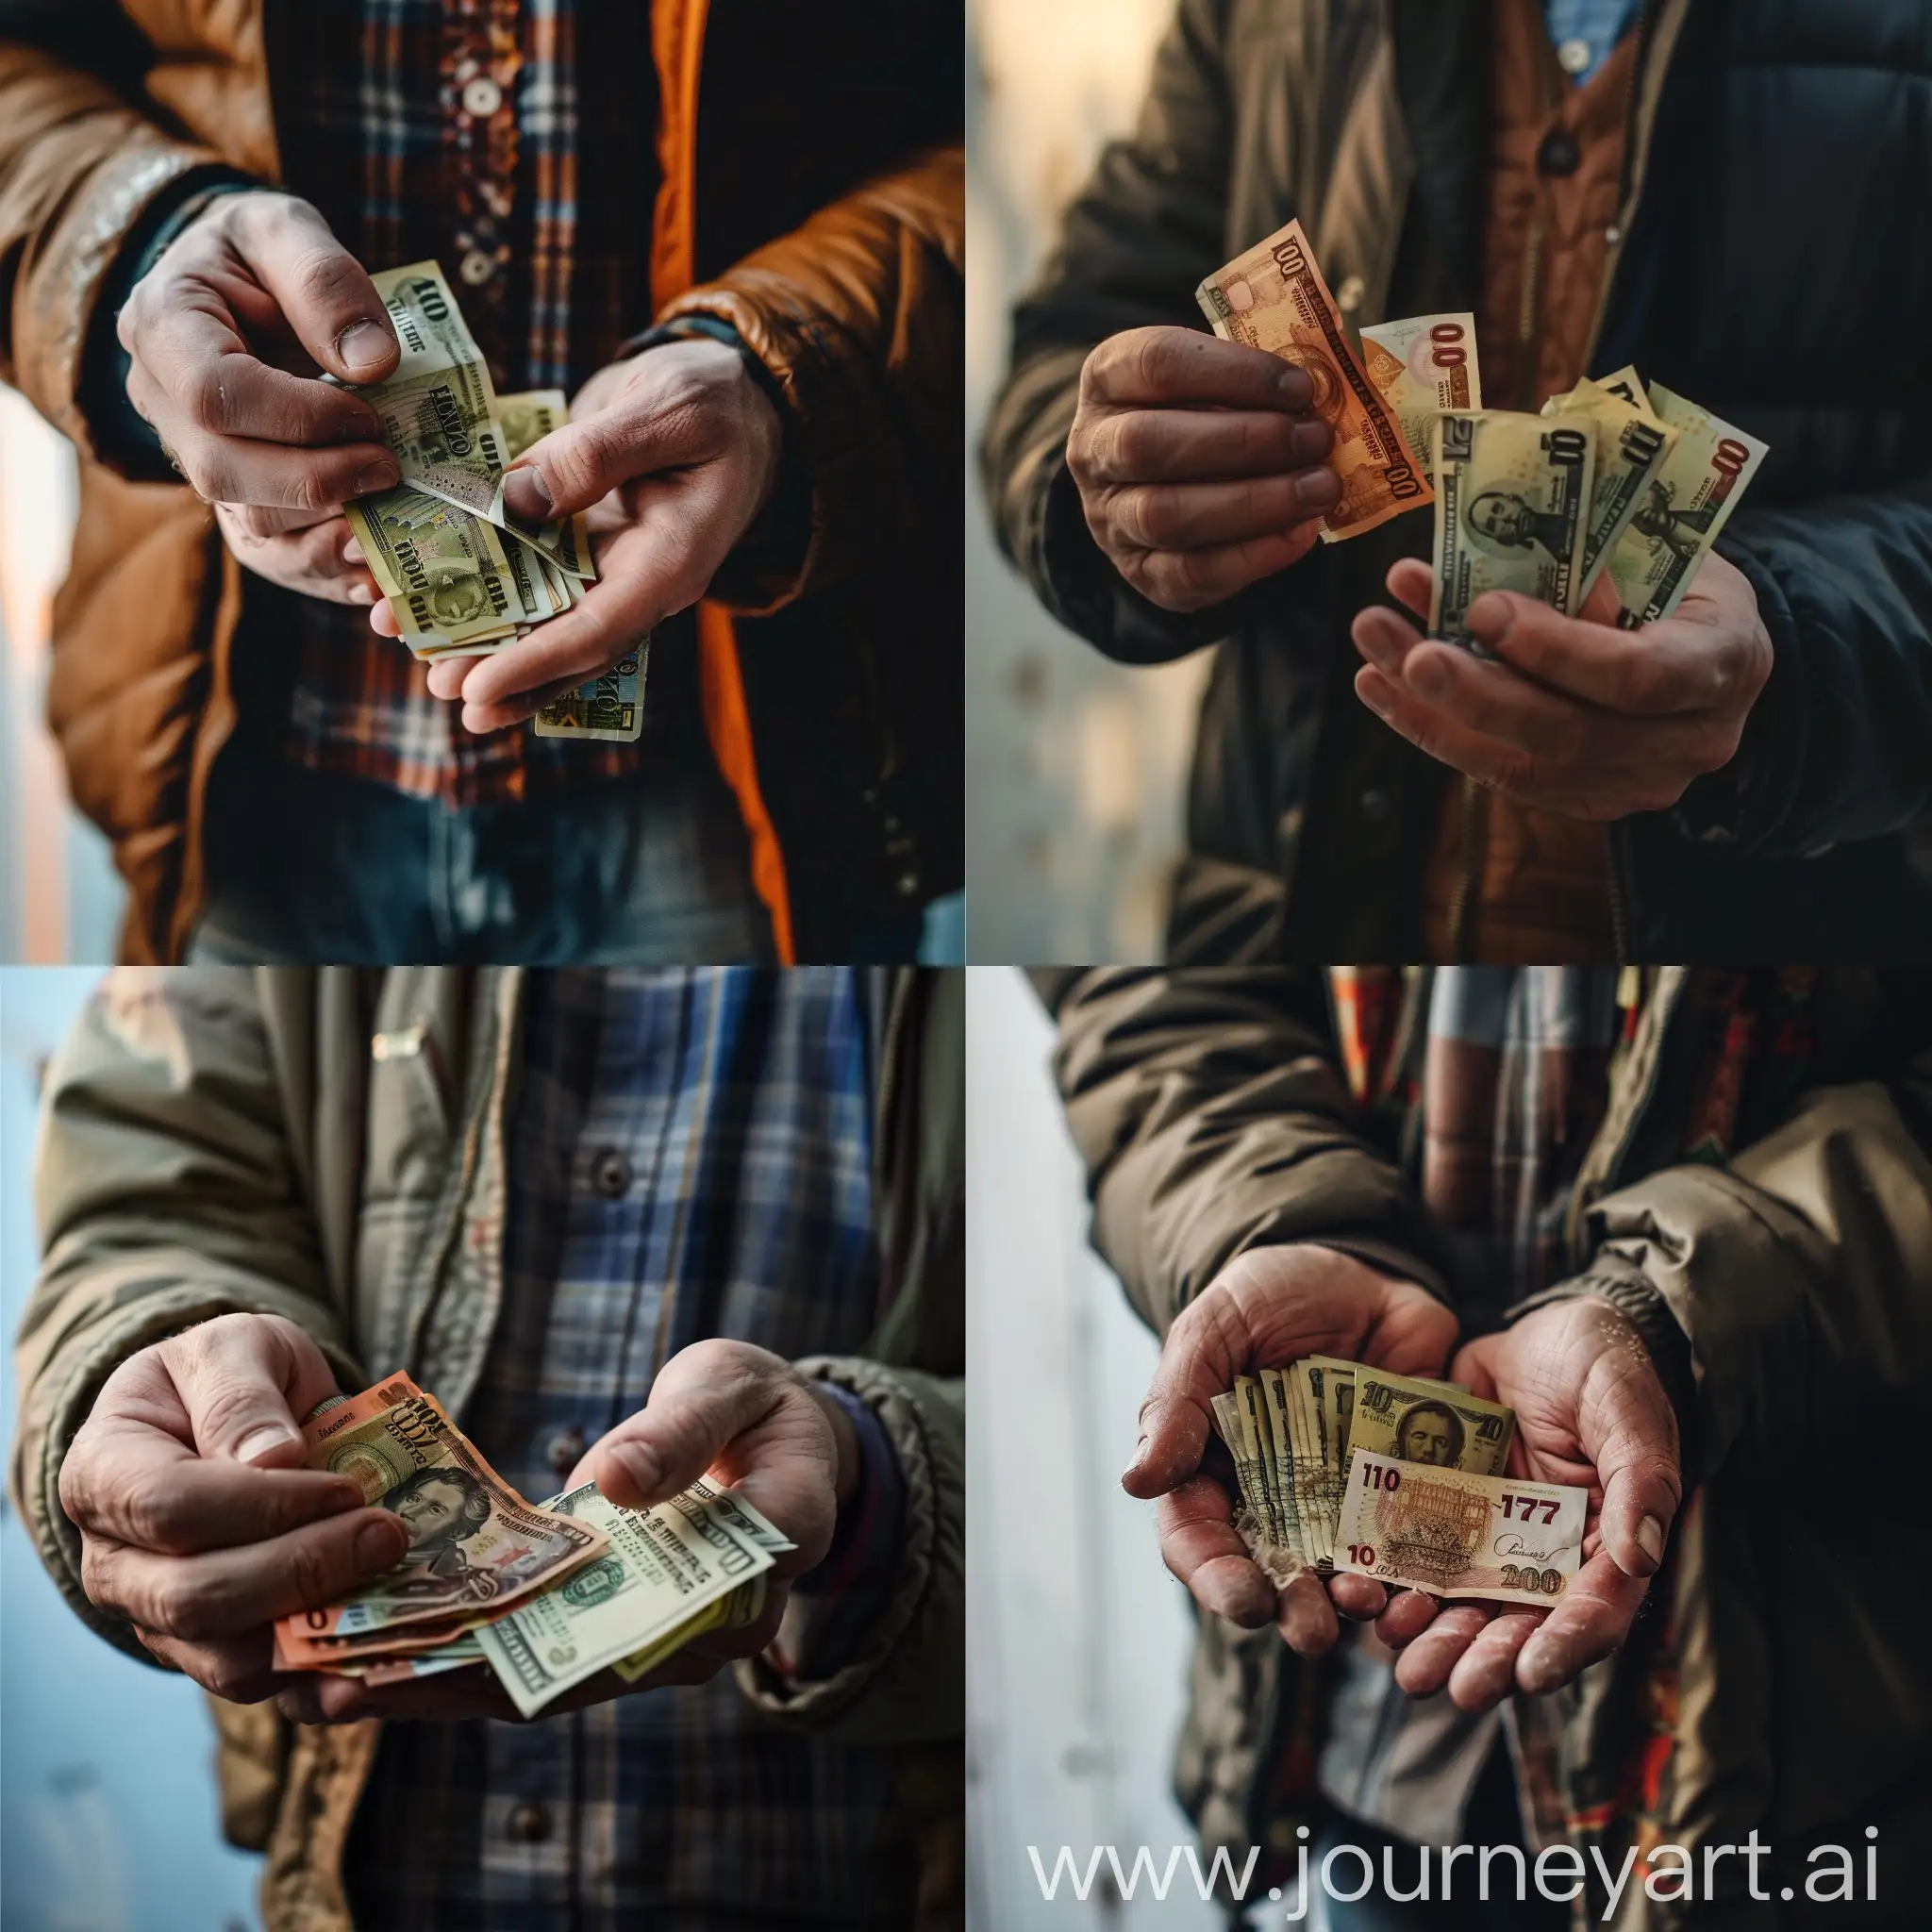 Man-Holding-137-Rubles-Wealth-Displayed-in-Handful-of-Russian-Currency